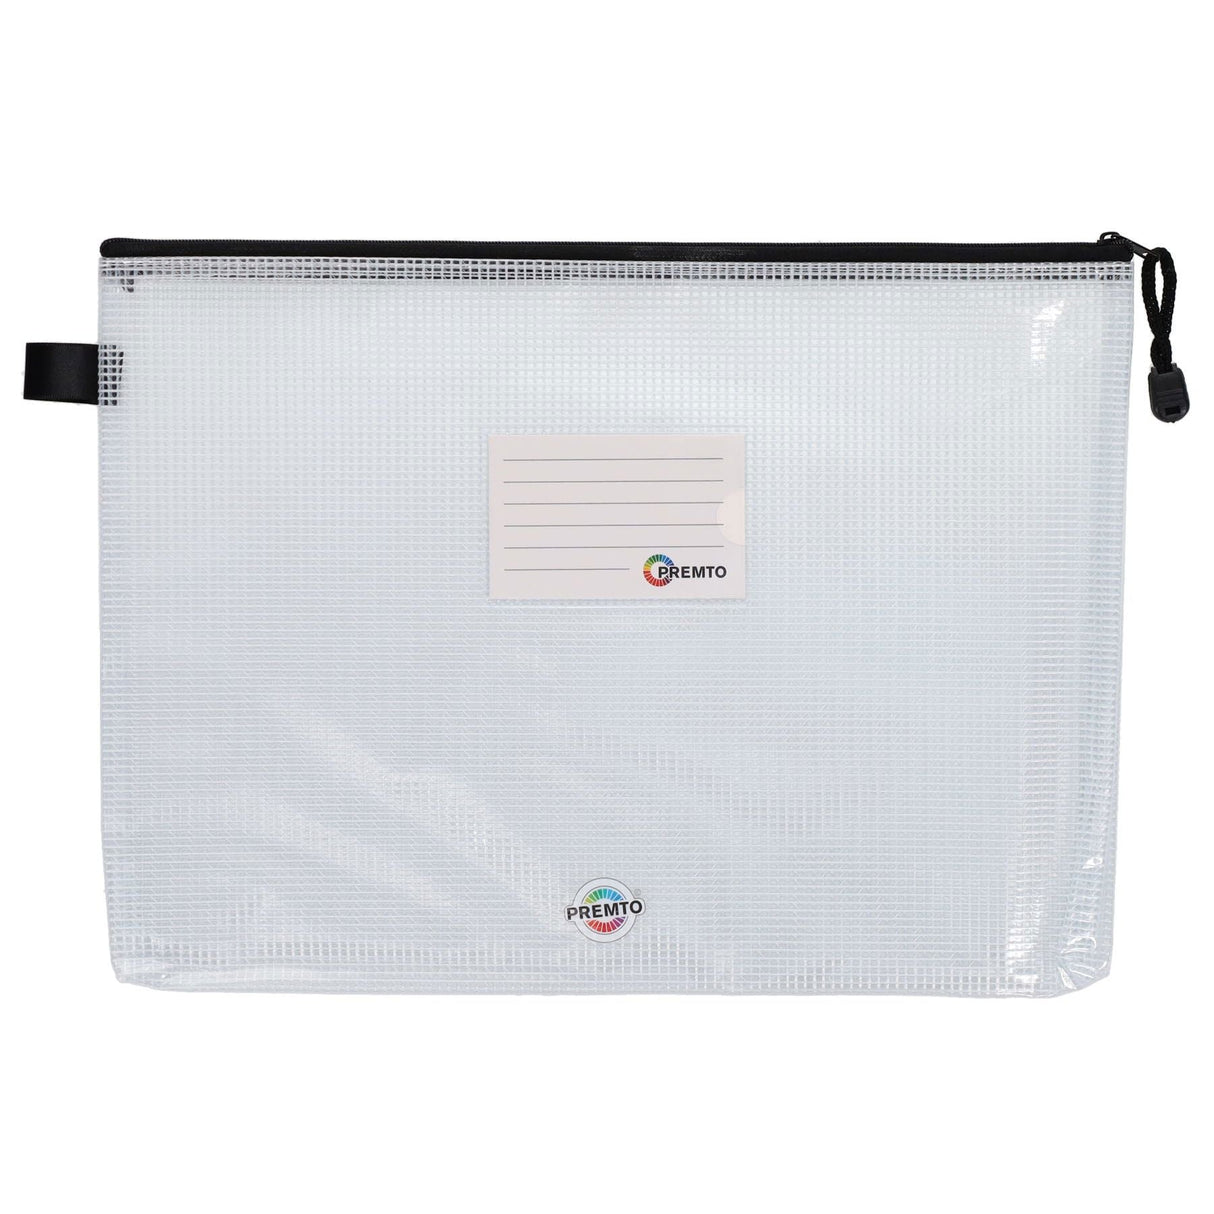 Premto A4+ Extra Durable Expanding Mesh Wallet - Clear Pearl-Mesh Wallet Bags-Premto|StationeryShop.co.uk